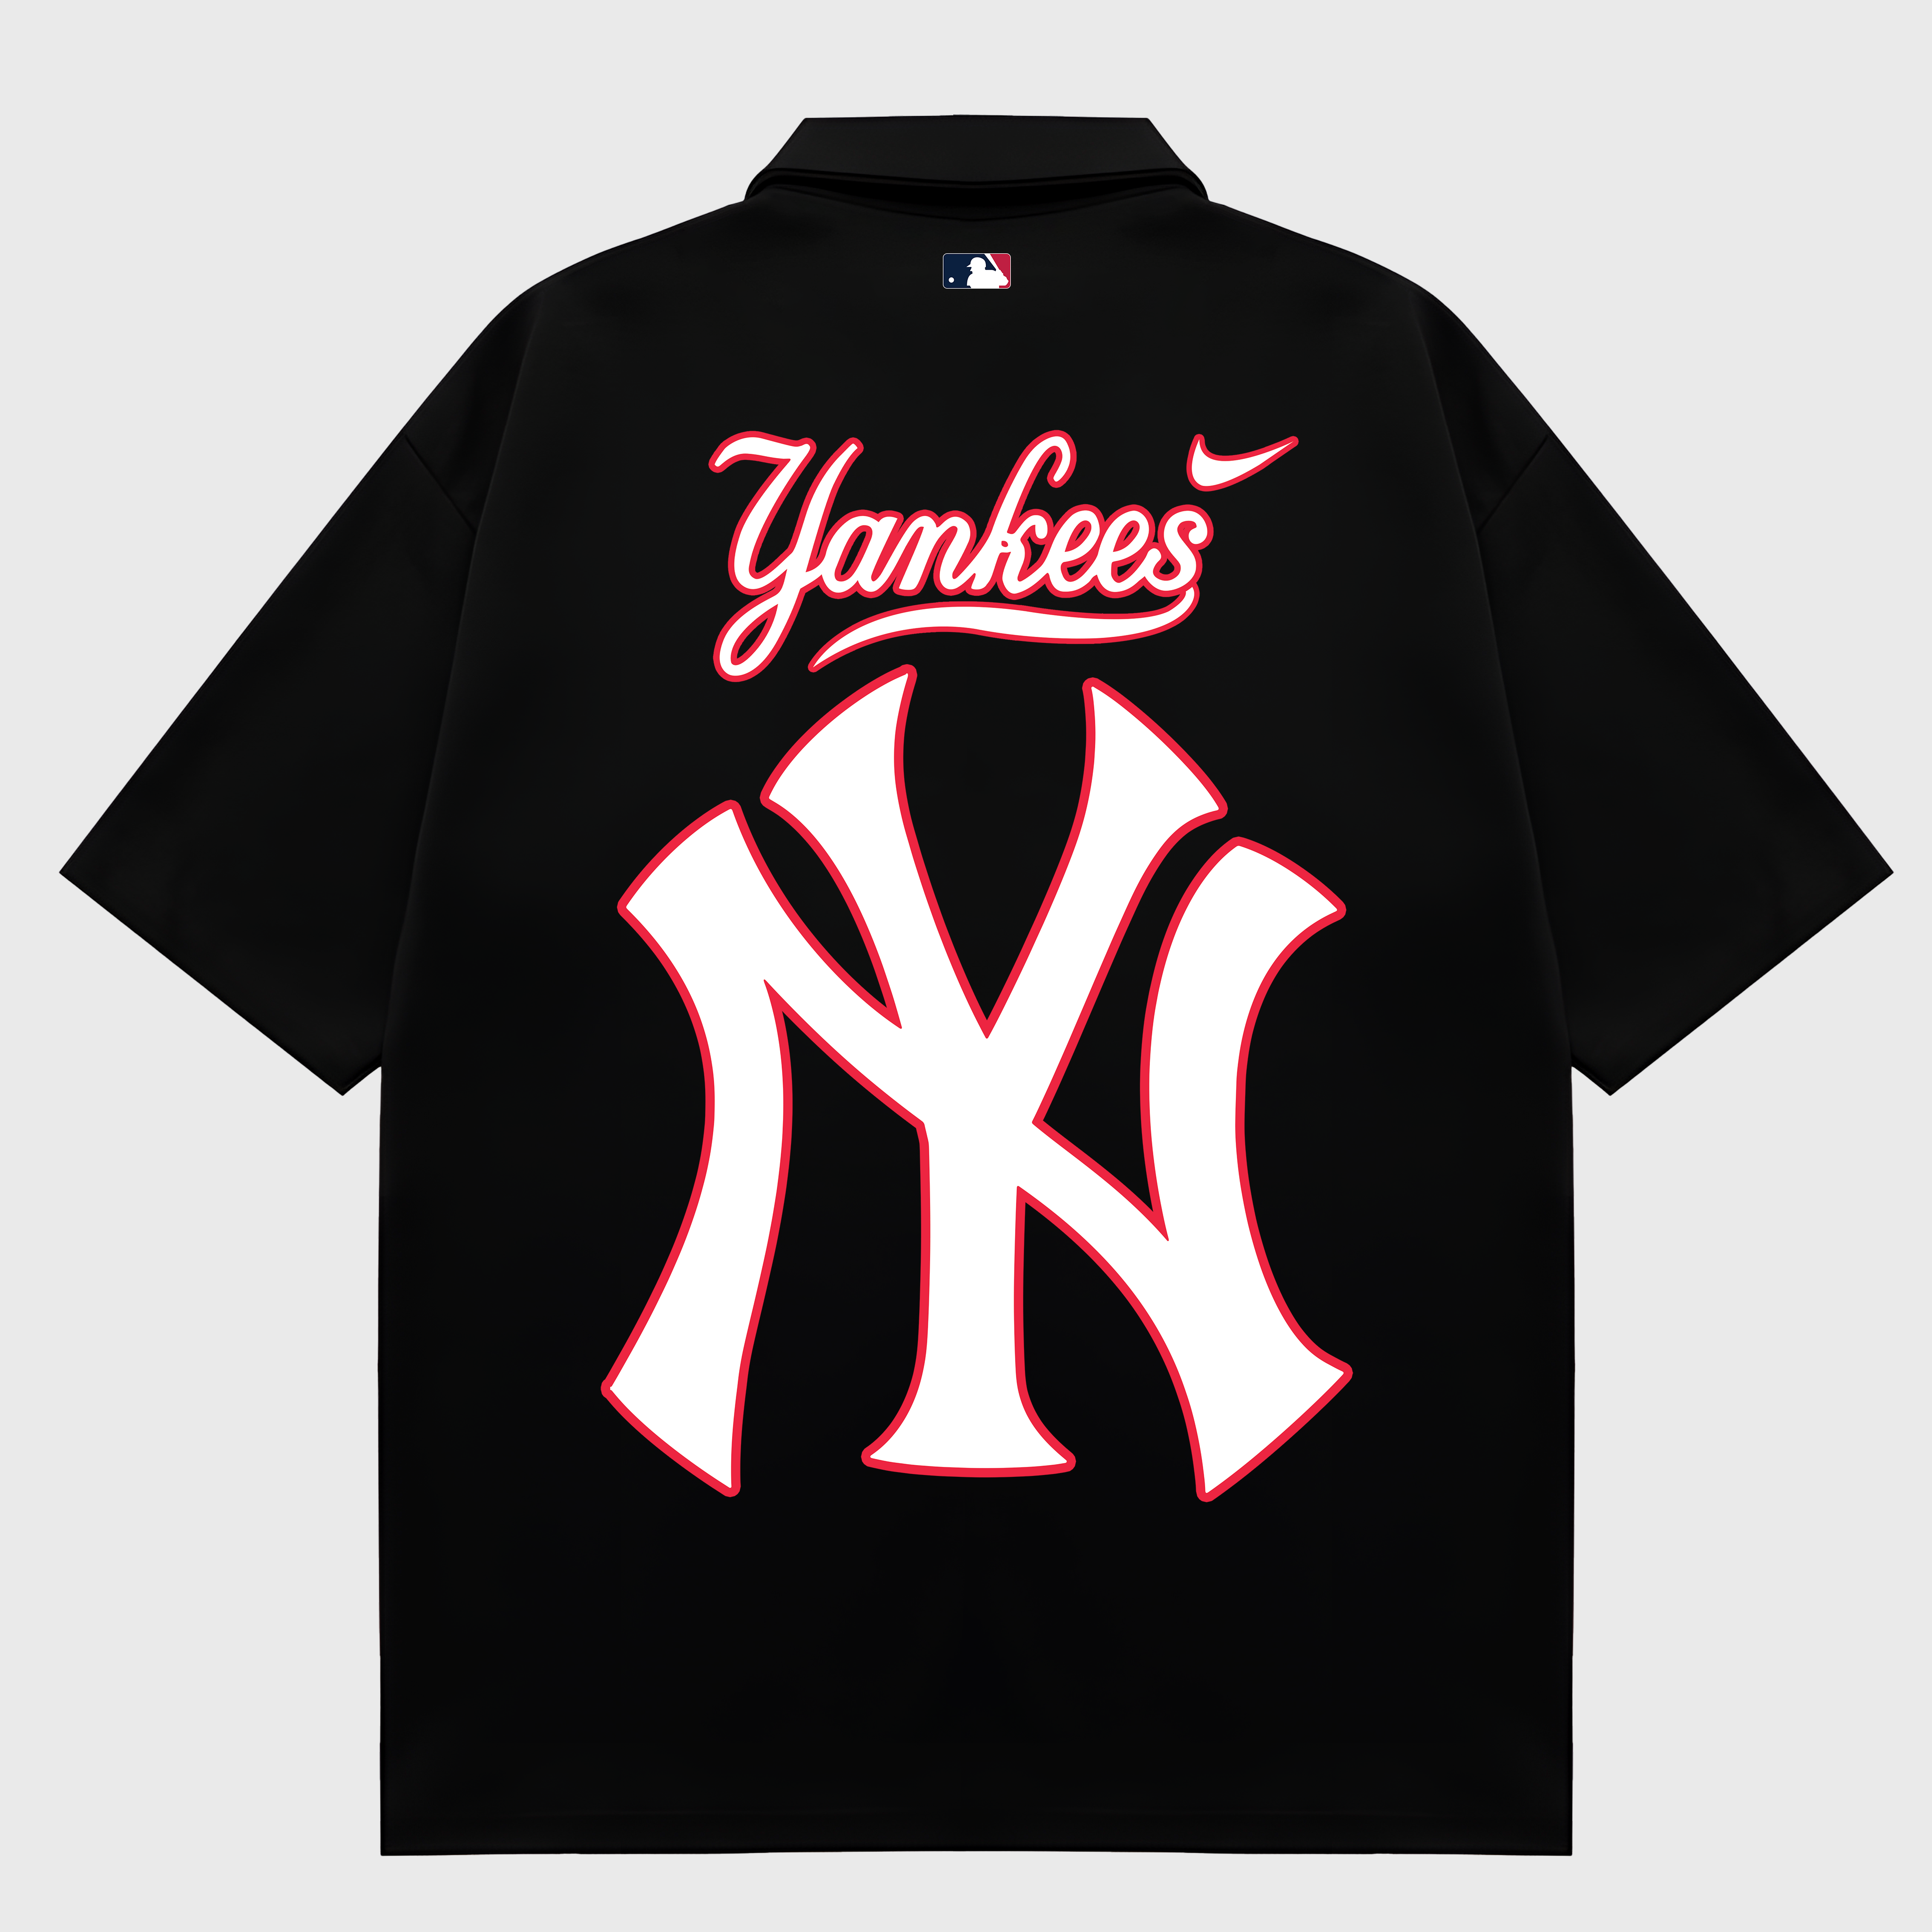 MLB New York Yankees Red Polo